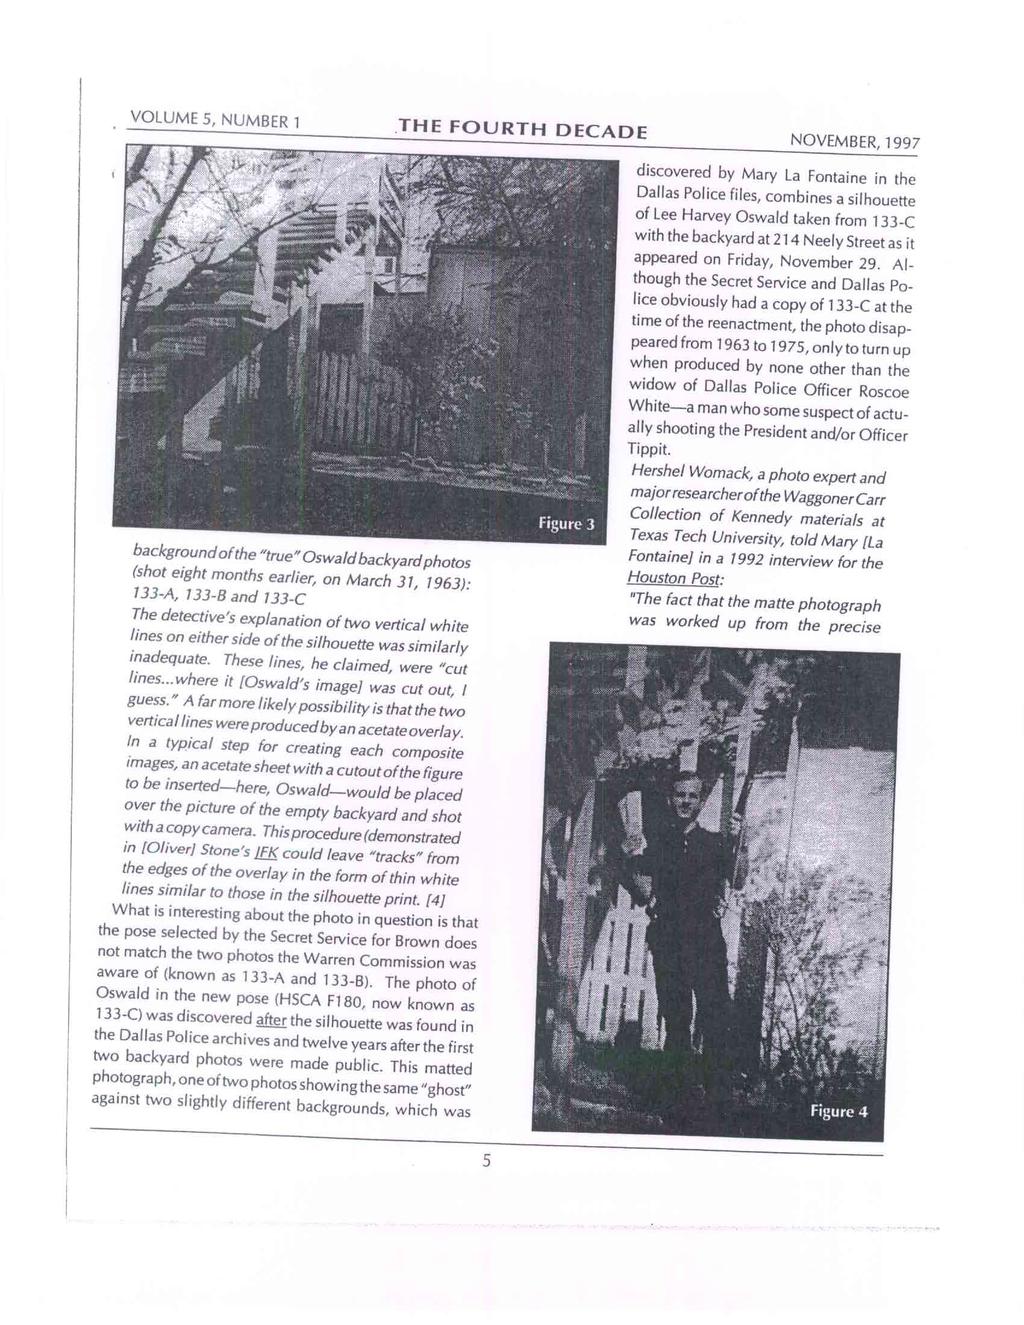 VOLUME 5, NUMBER 1 THE FOURTH DECADE NOVEMBER, 1997 discovered by Mary La Fontaine in the Dallas Police files, combines a silhouette of Lee Harvey Oswald taken from 133-C with the backyard at 214